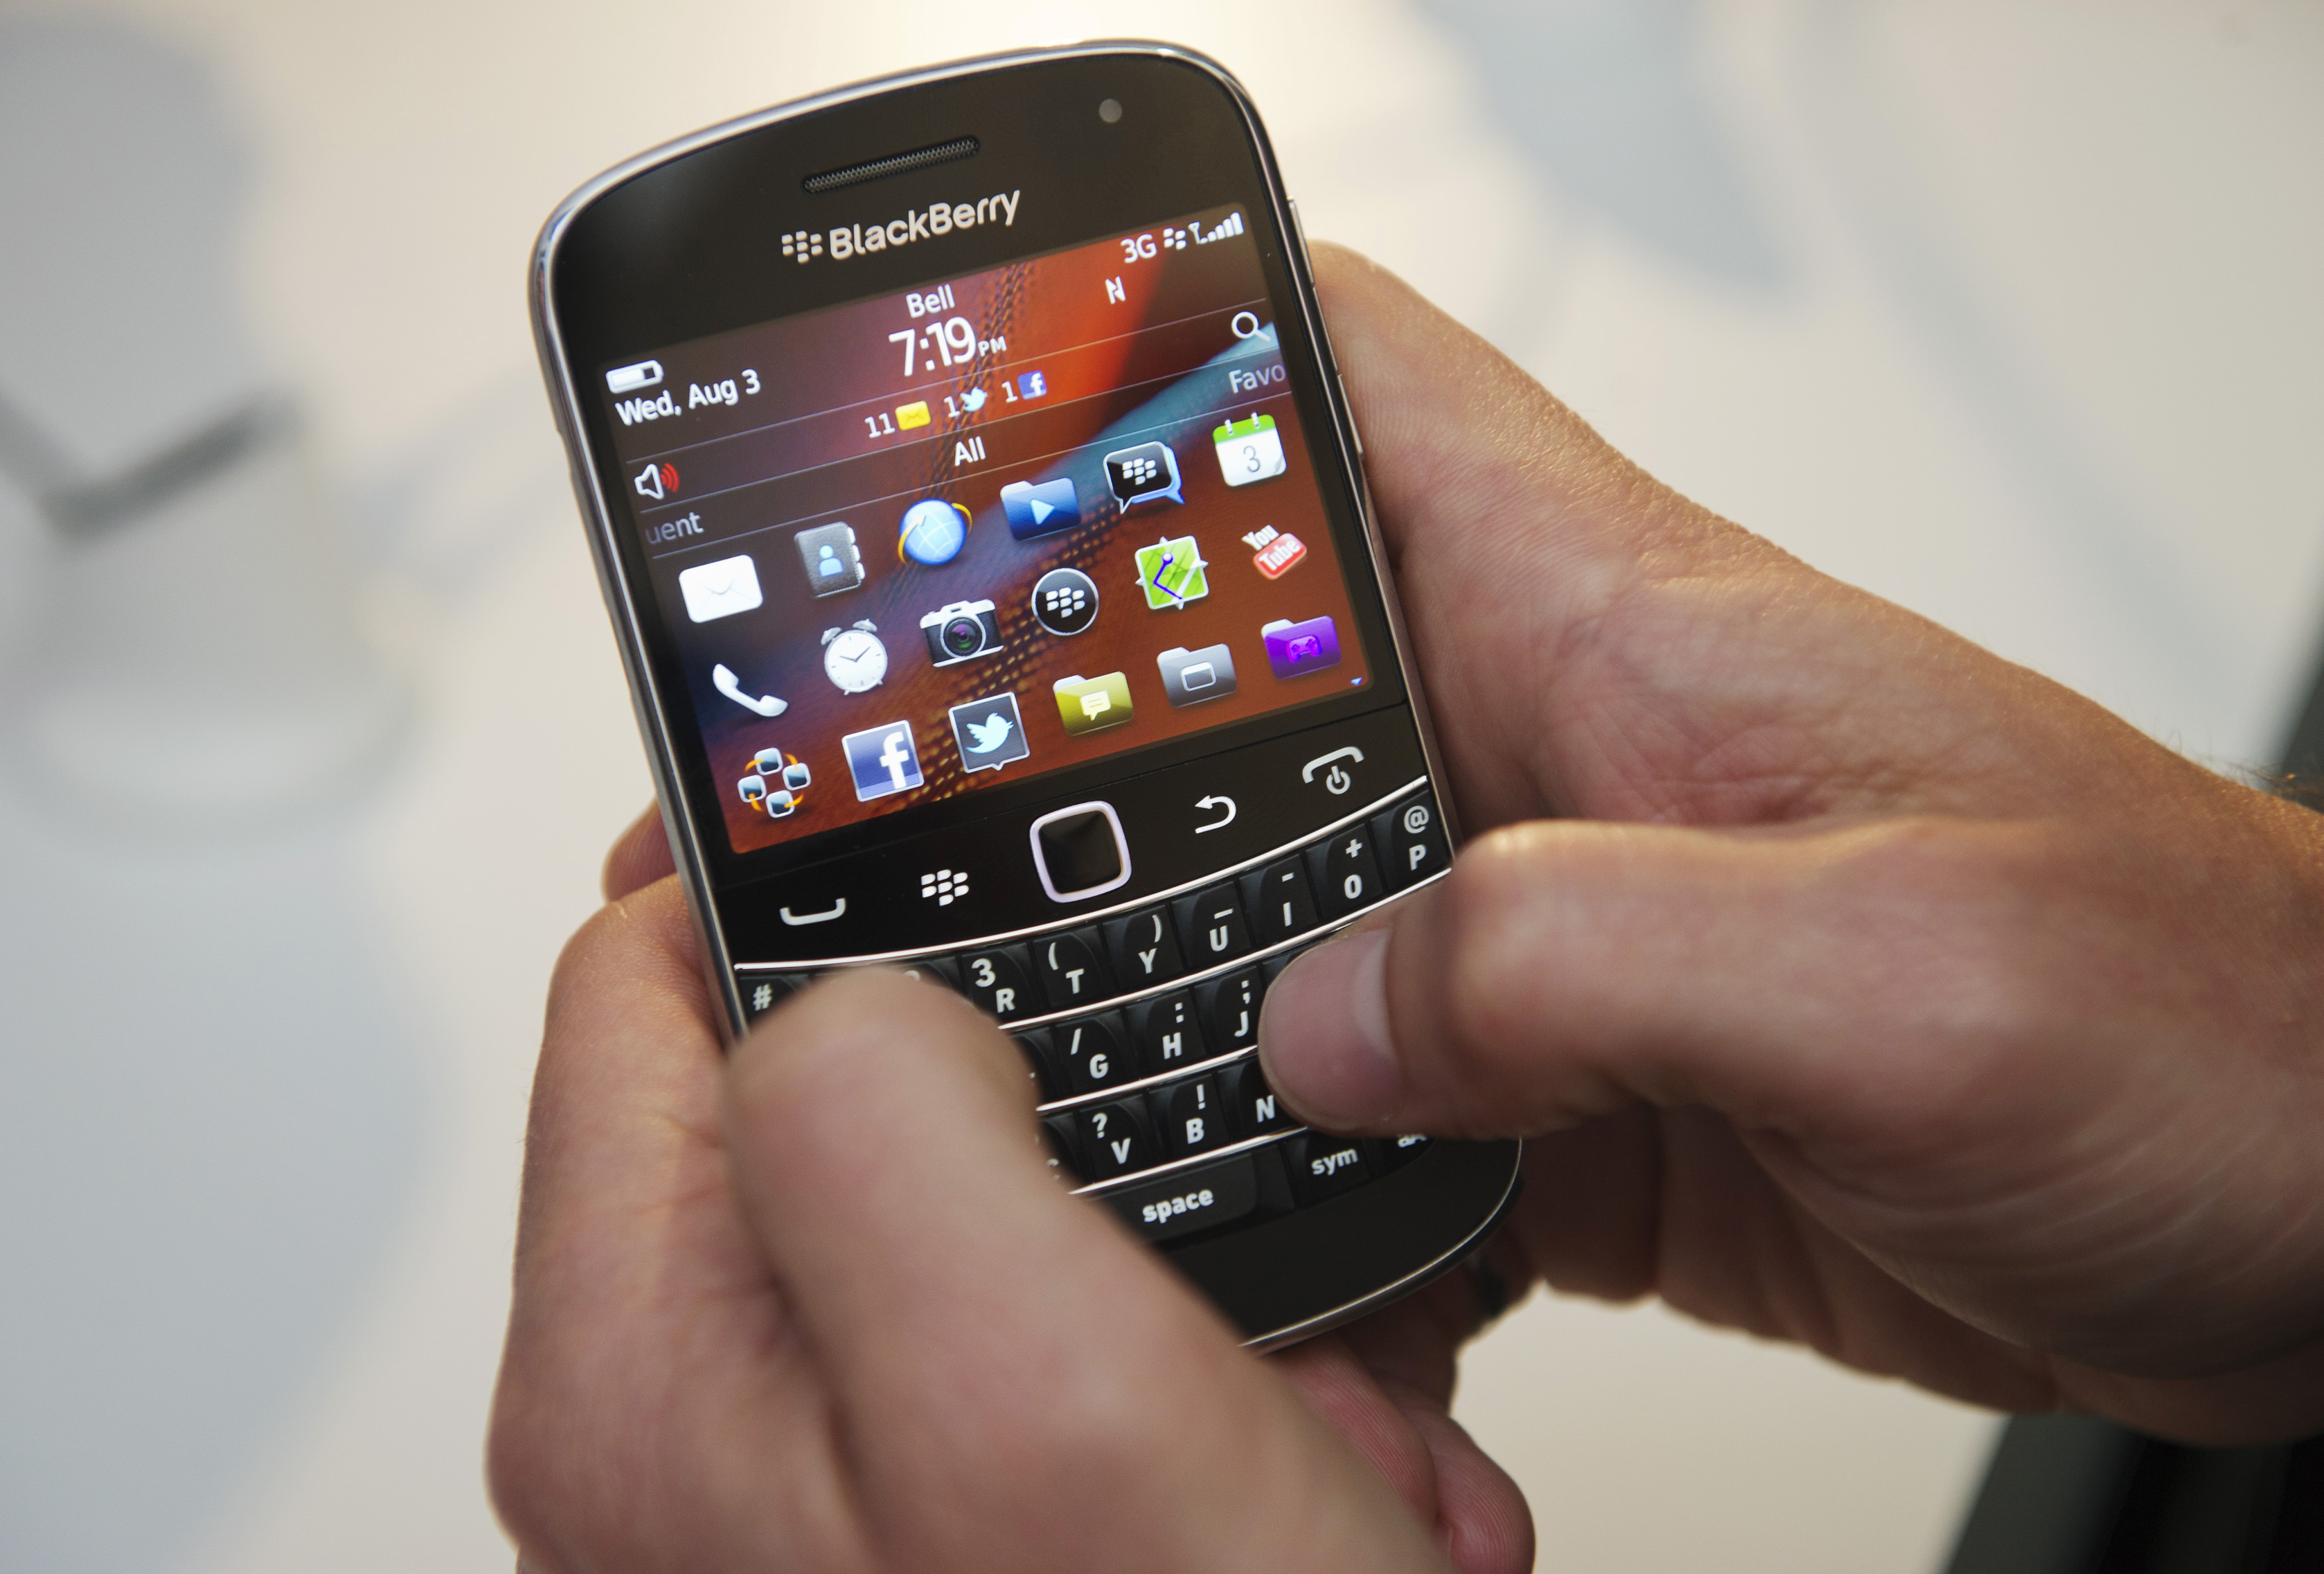 BlackBerry OS devices are pretty much dead after January 4th